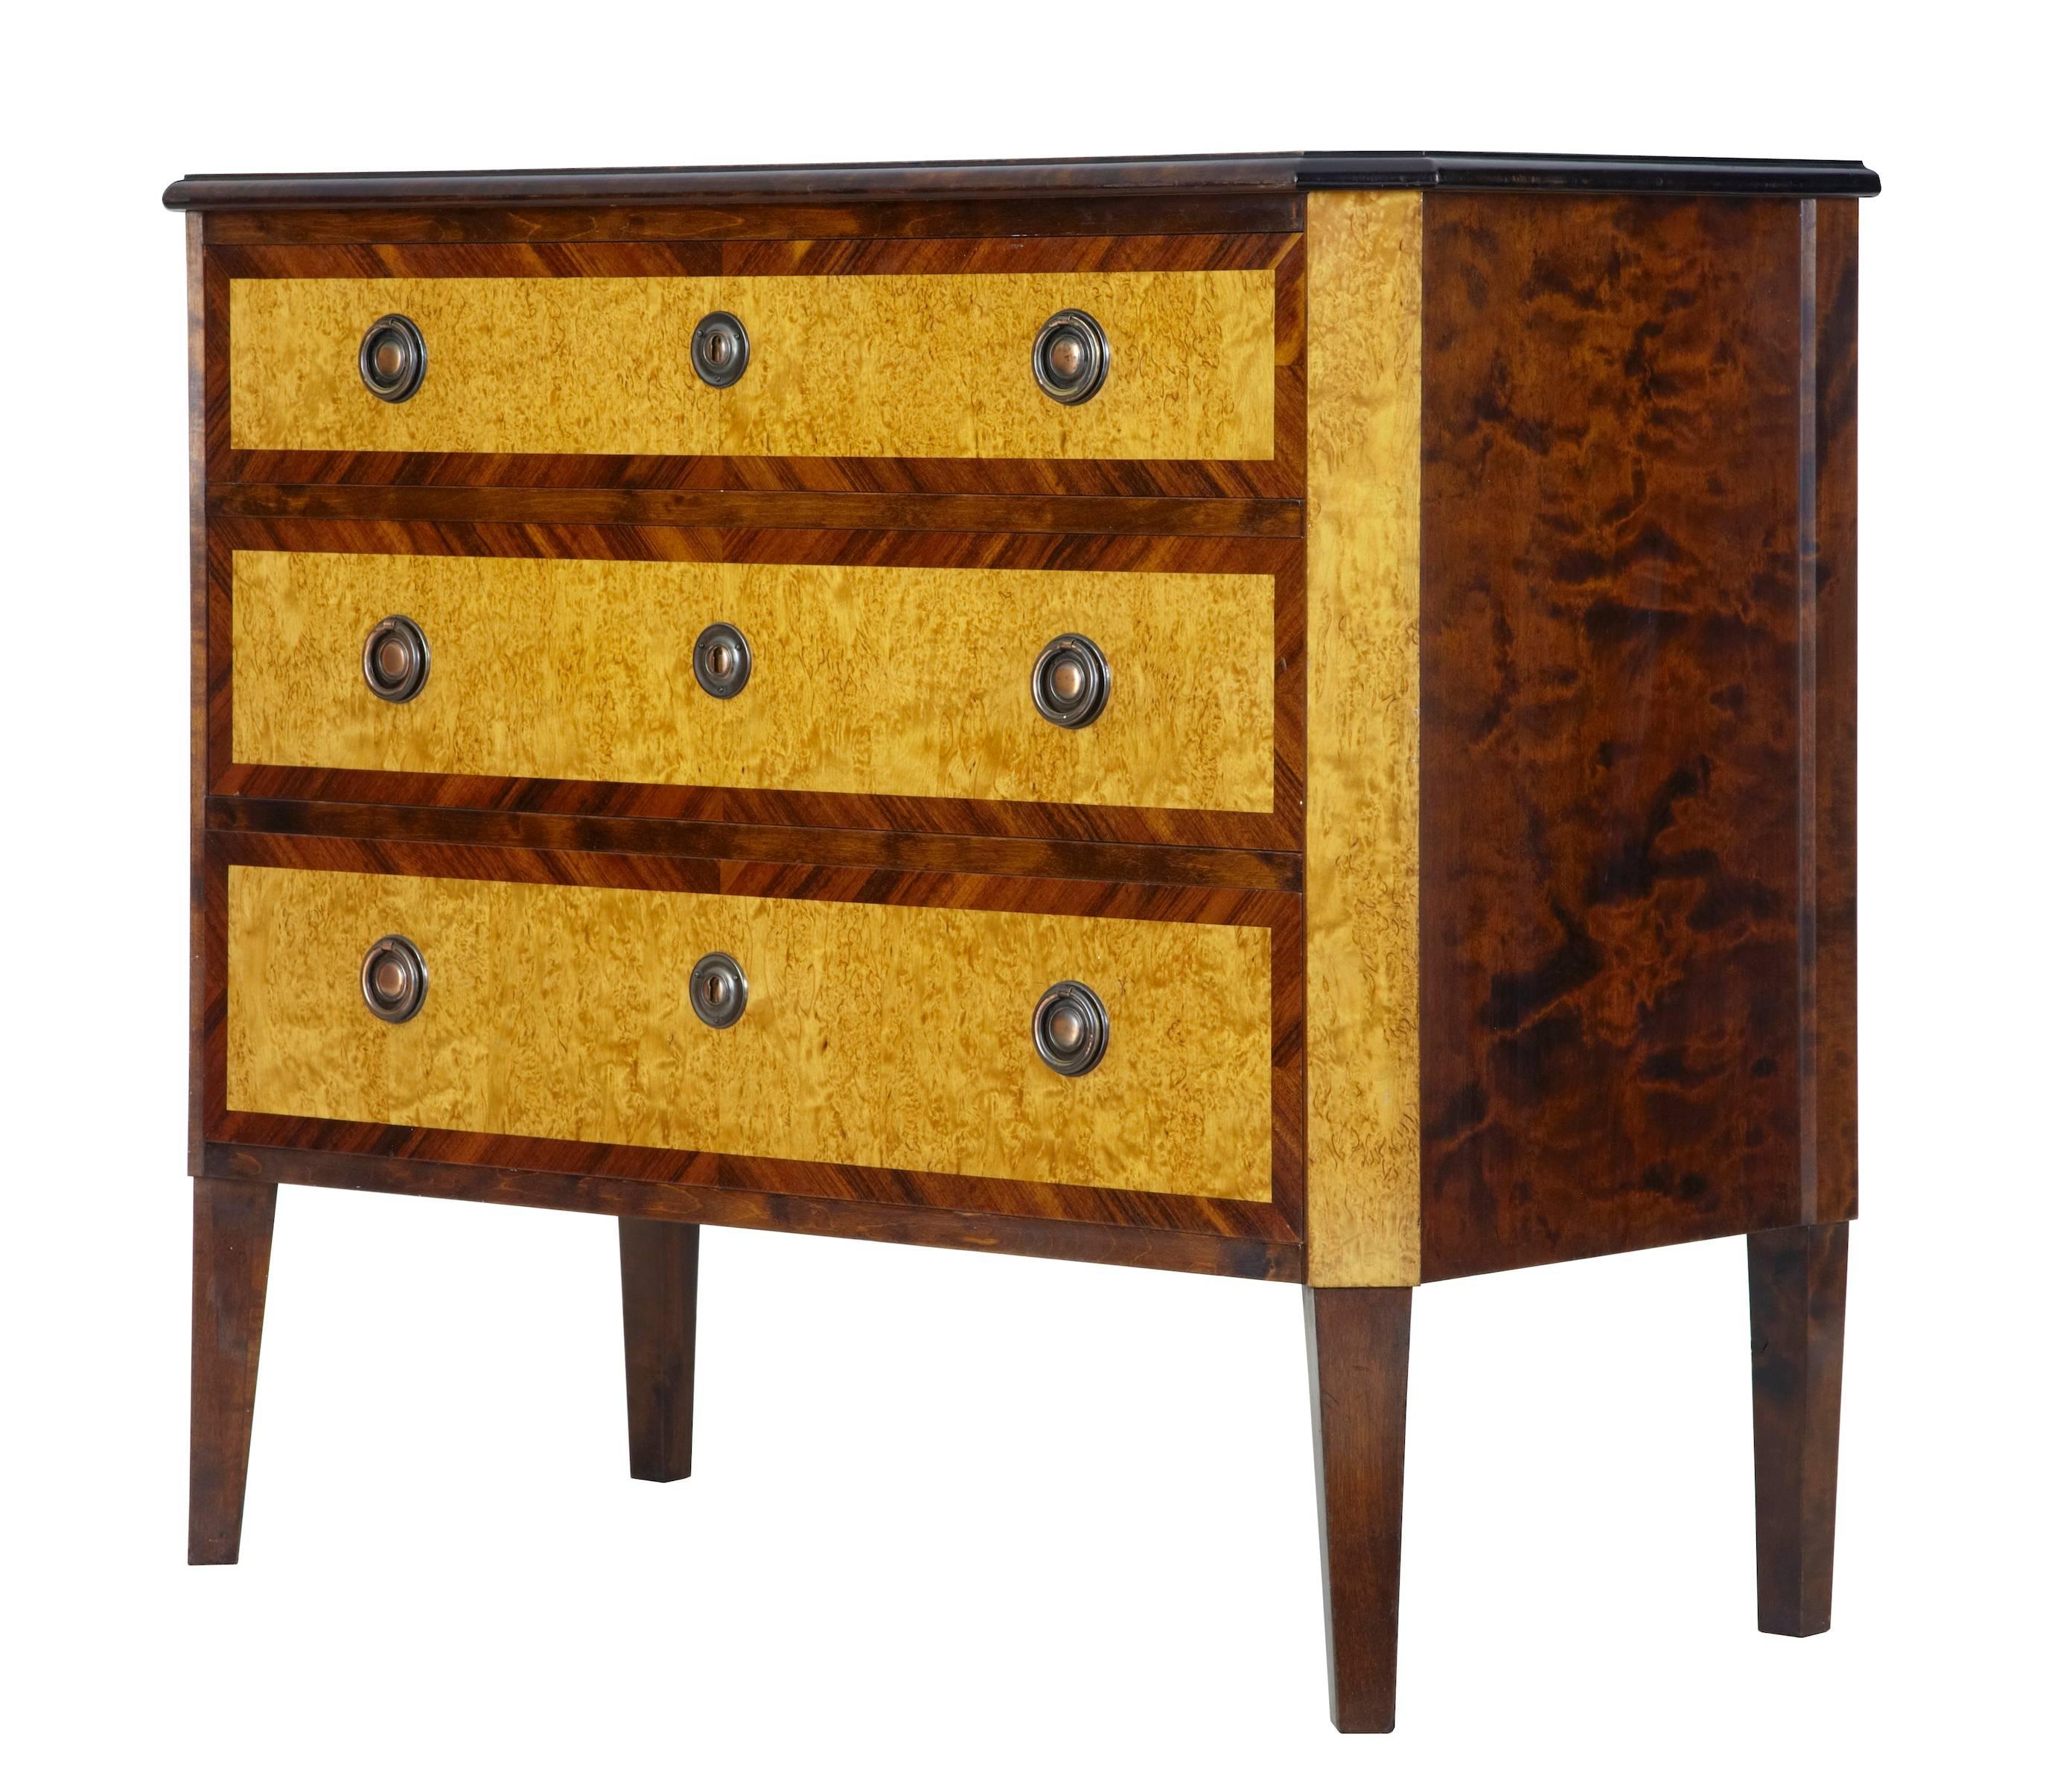 Birch commode crossbanded with kingwood, circa 1920.
Three-drawer chest, with contrasting veneers. Dark birch top.
Standing on tapering legs.
Some marking to top surface.

Measures: Height 32 1/2